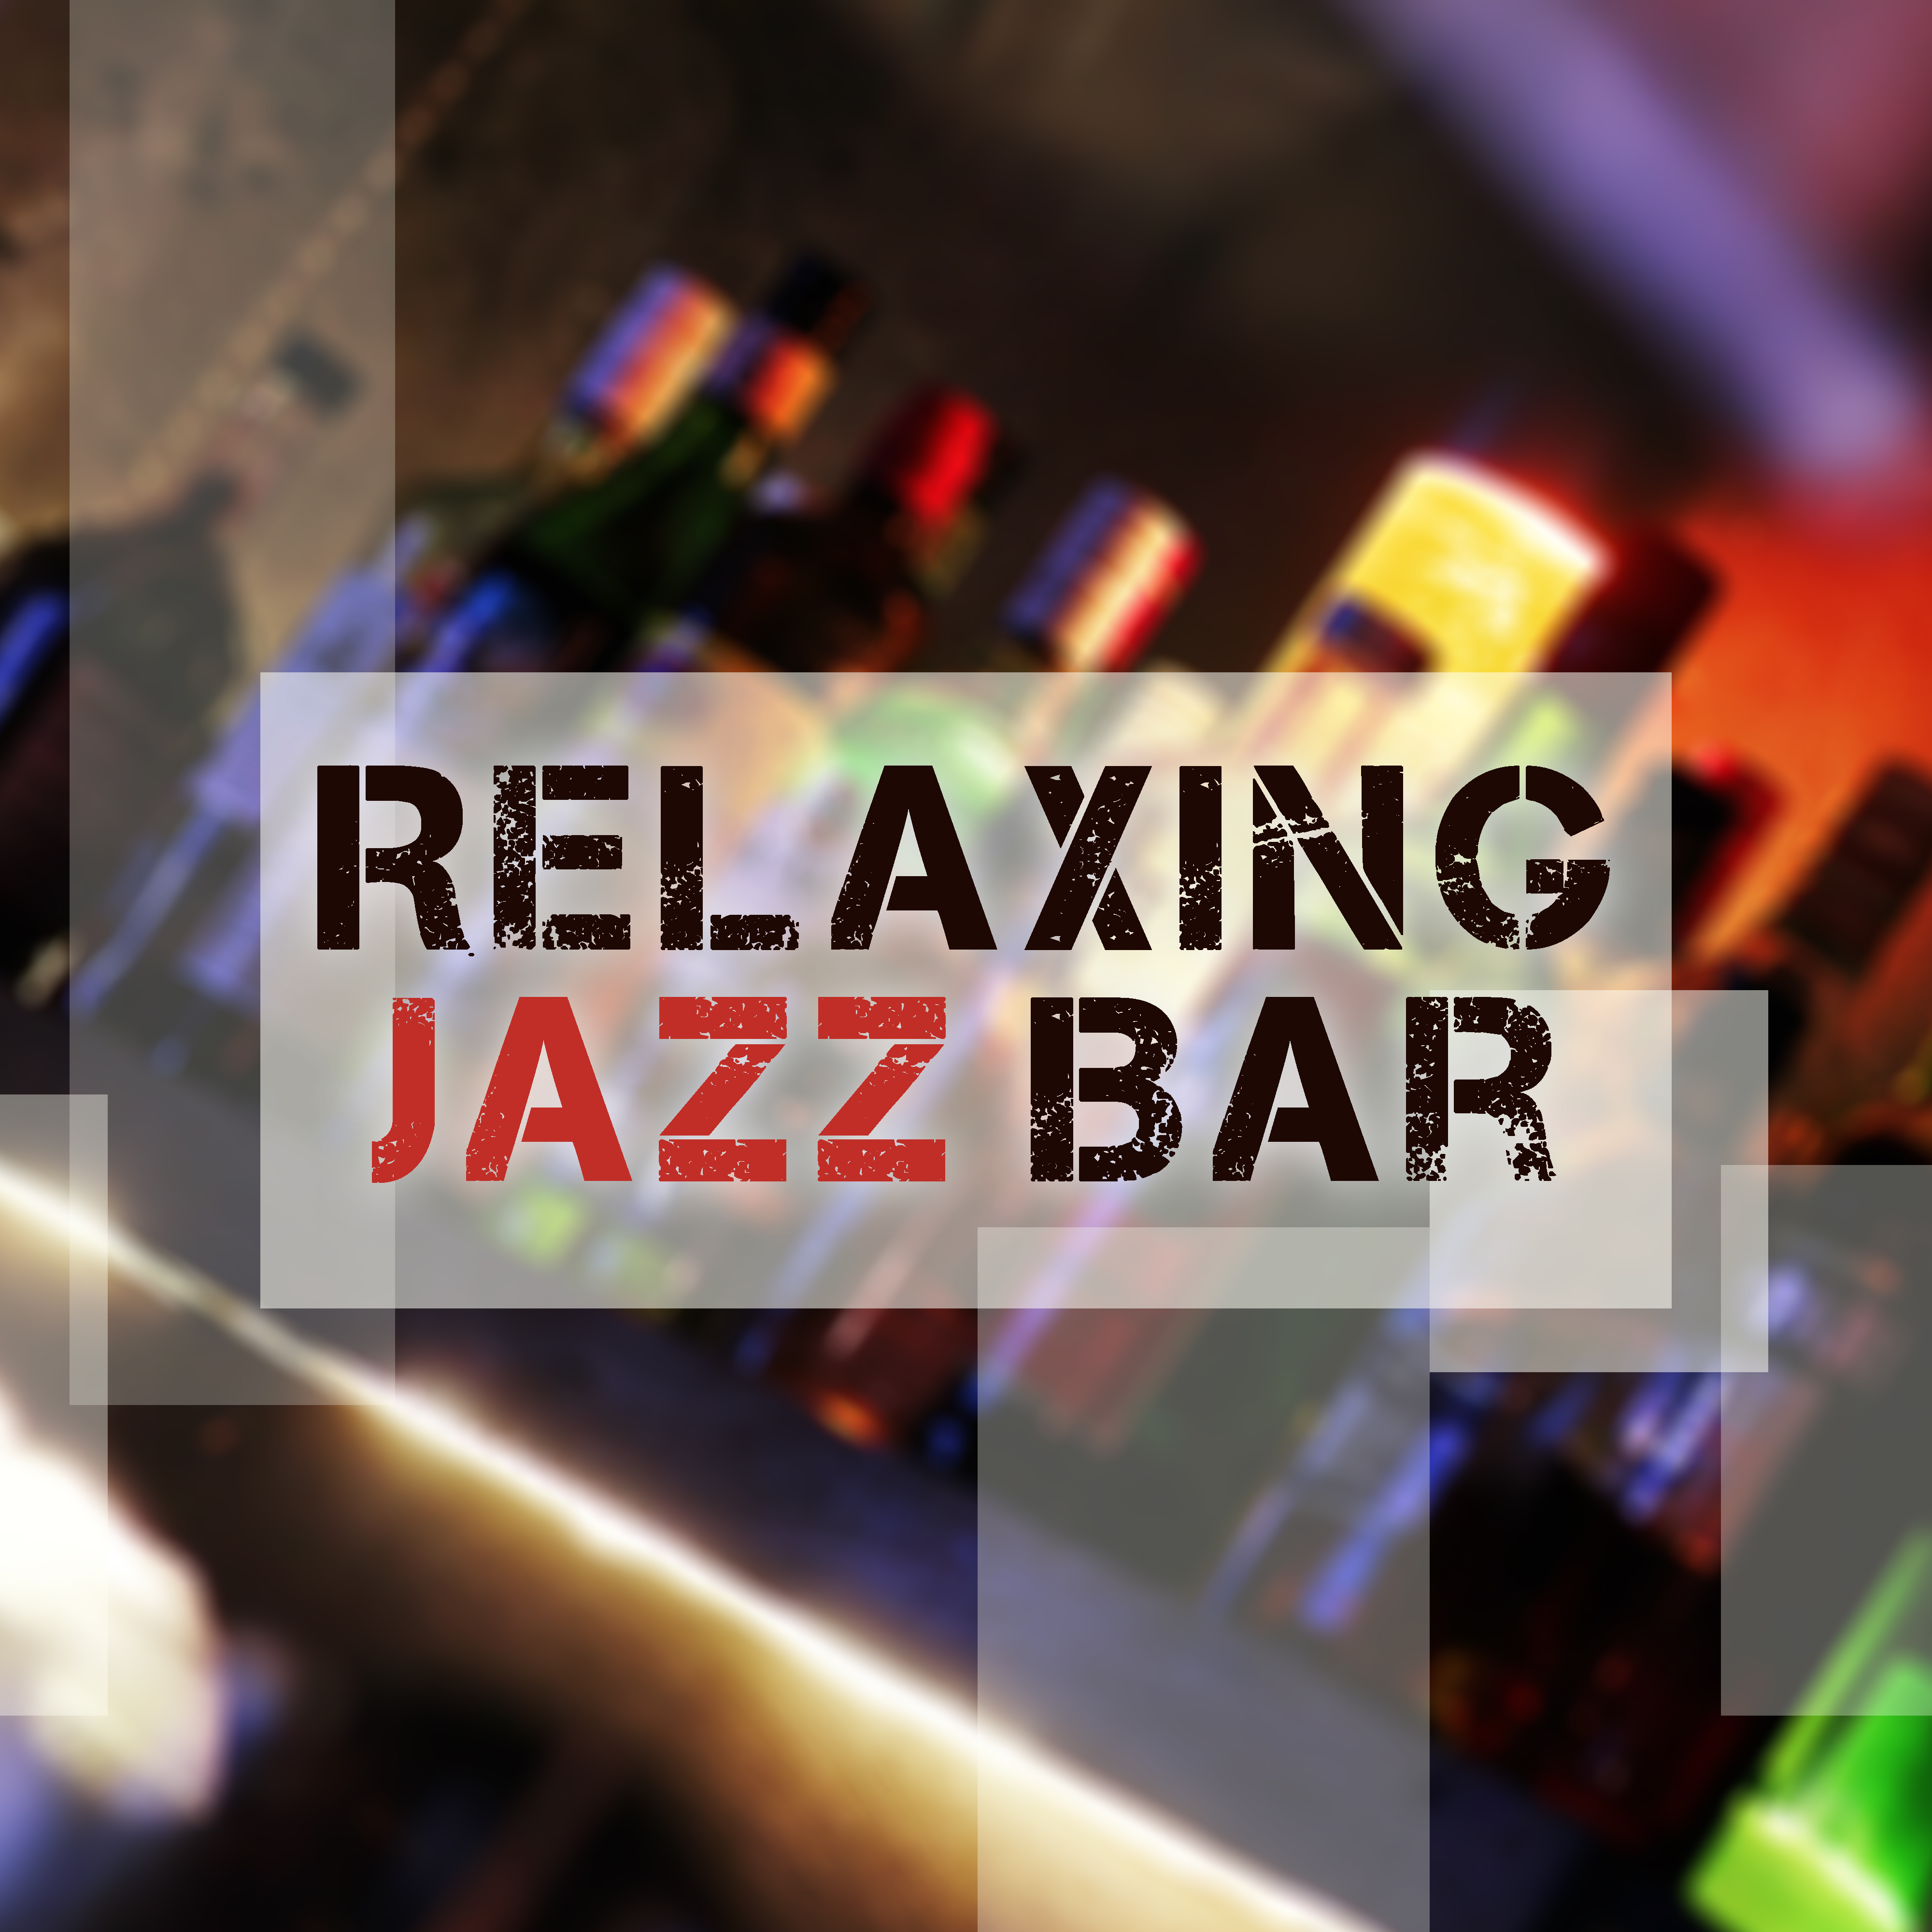 Relaxing Jazz Bar  Chilled Time, Jazz Cafe, Mellow Sounds, Relax at Night, Peaceful Jazz